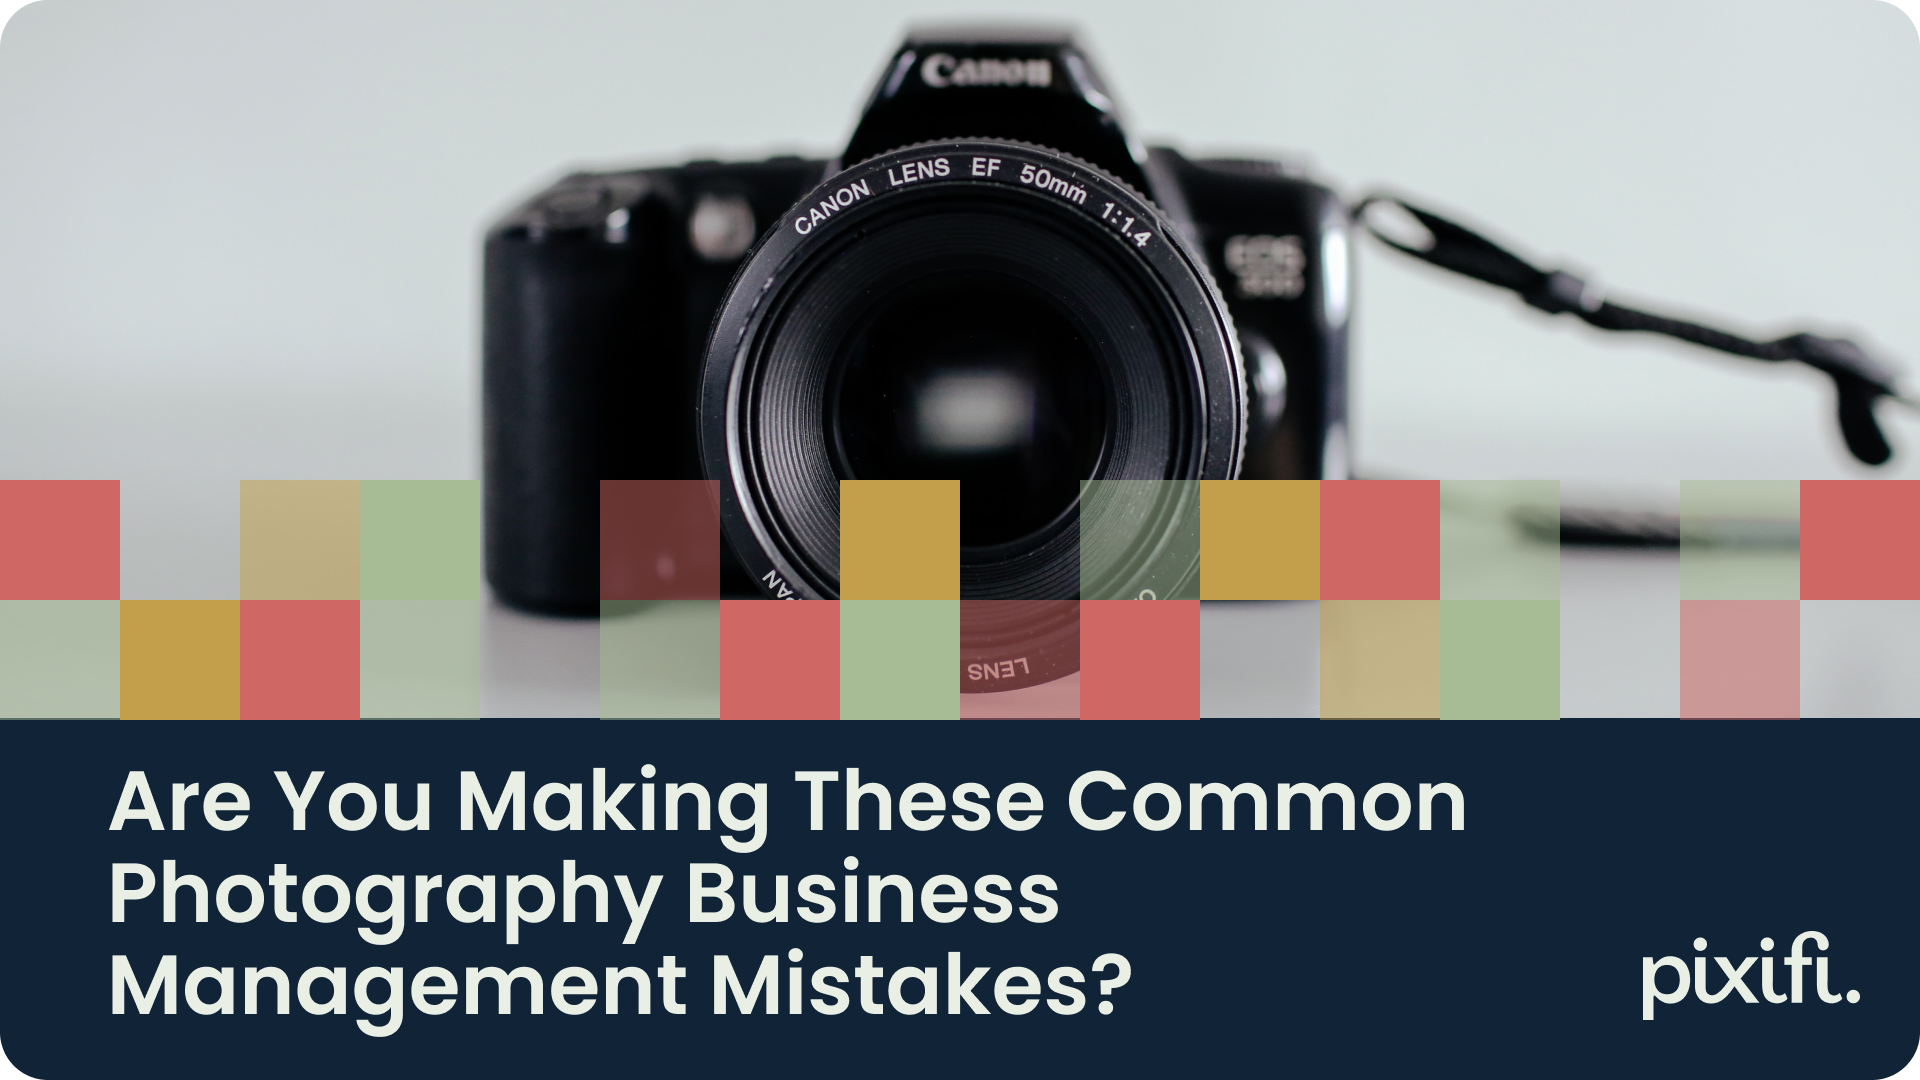 Are You Making These Common Photography Business Management Mistakes